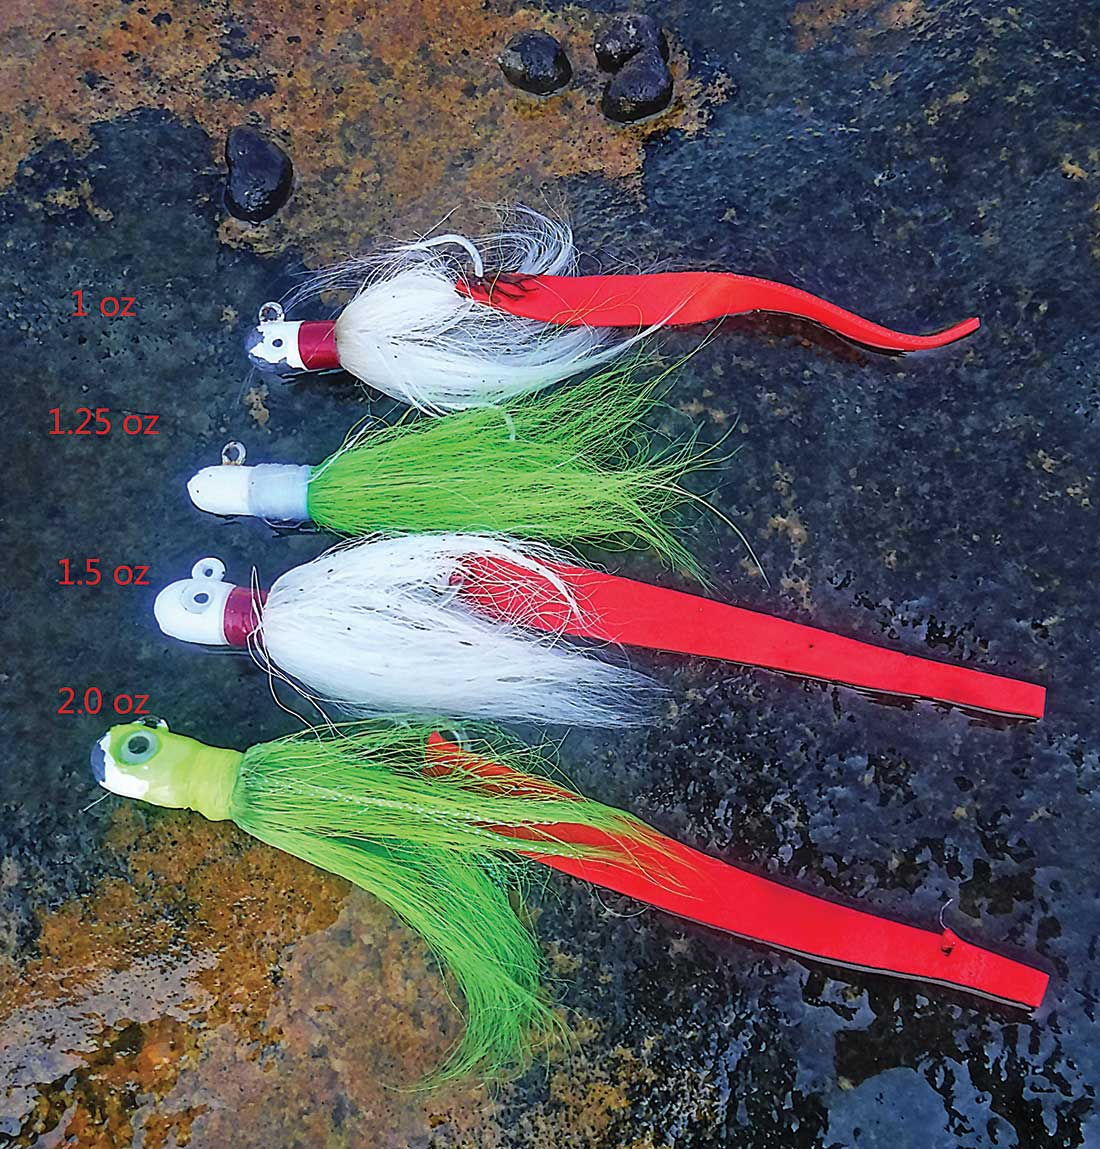 A good variety of bucktails